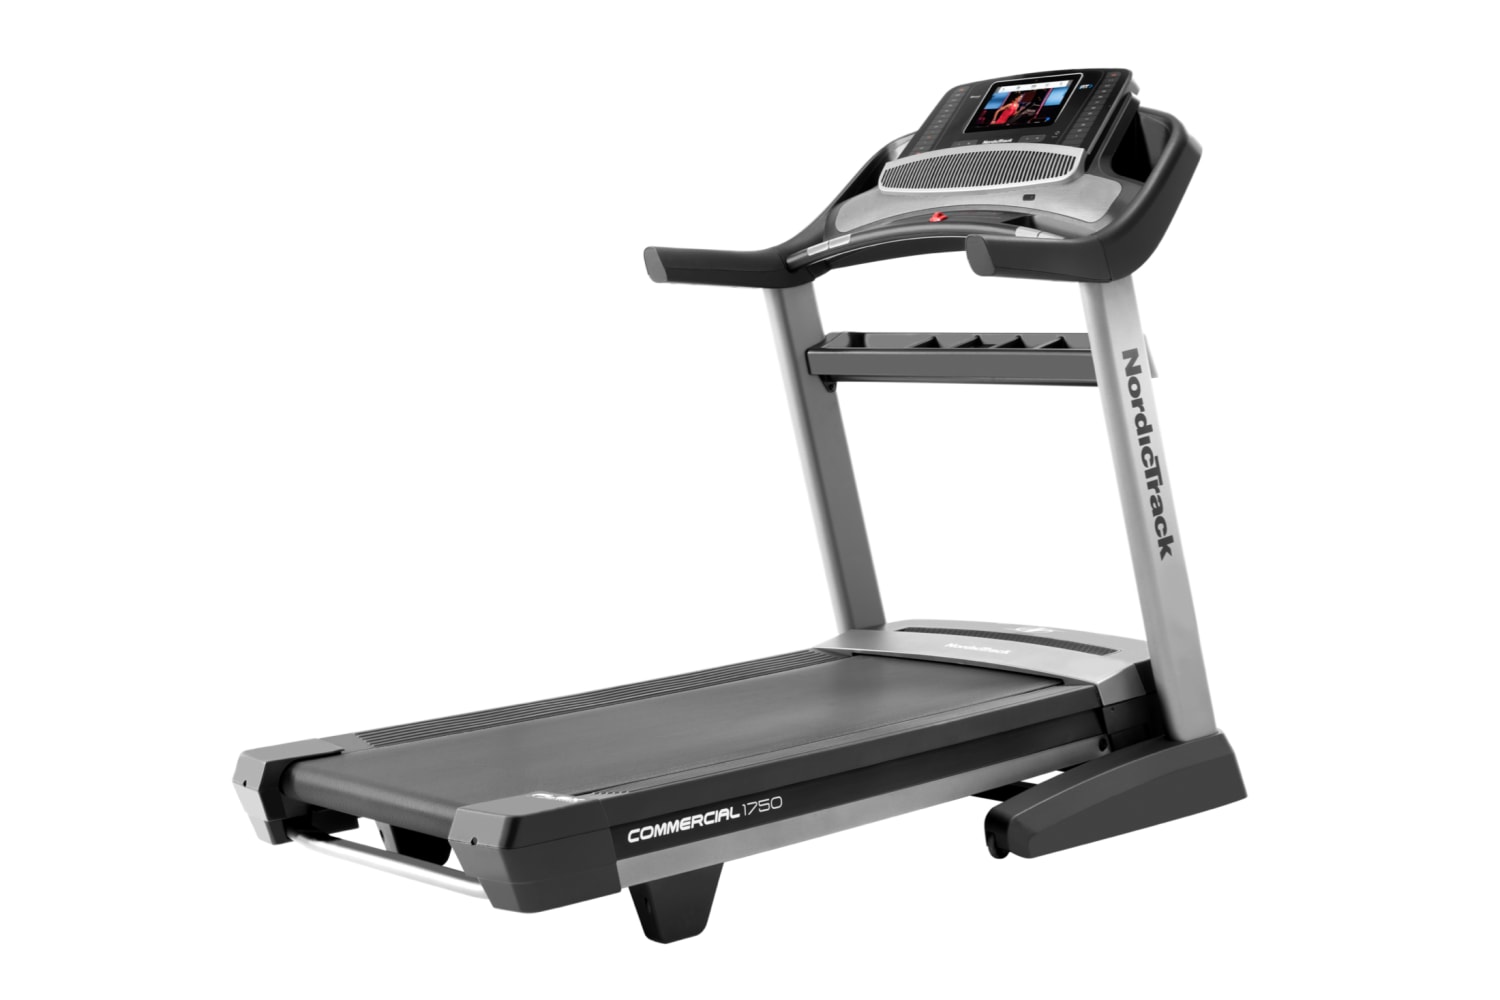 Commercial 1750 iFit Treadmill 